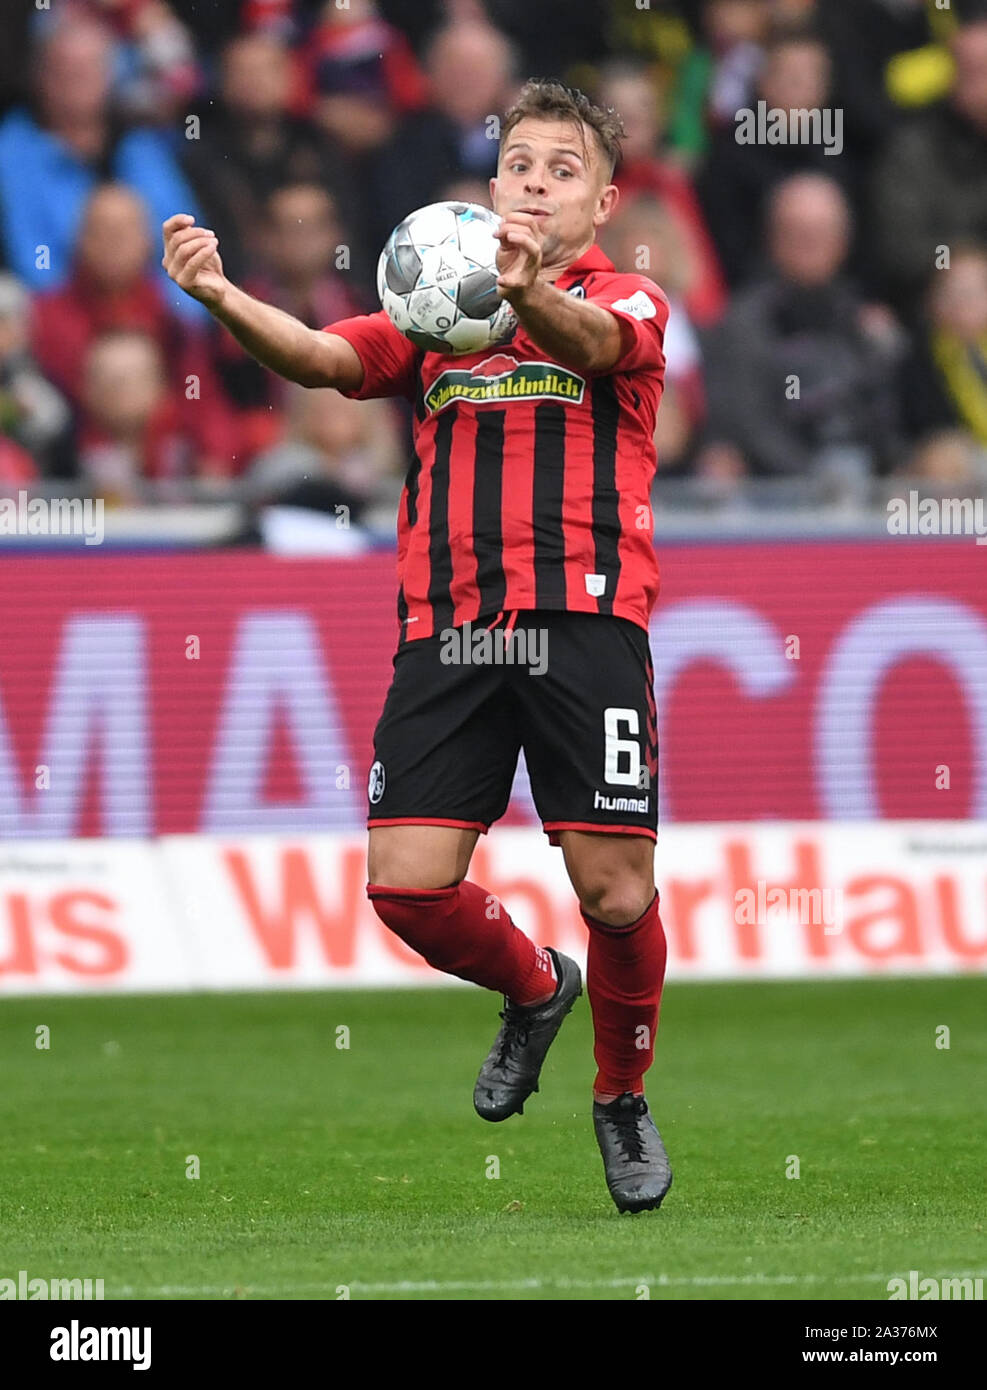 Freiburg, Germany. 05th Oct, 2019. Soccer: Bundesliga, SC Freiburg - Borussia Dortmund, 7th matchday in the Black Forest Stadium. Amir Abrashi of Freiburg accepts the ball. Credit: Patrick Seeger/dpa - IMPORTANT NOTE: In accordance with the requirements of the DFL Deutsche Fußball Liga or the DFB Deutscher Fußball-Bund, it is prohibited to use or have used photographs taken in the stadium and/or the match in the form of sequence images and/or video-like photo sequences./dpa/Alamy Live News Stock Photo